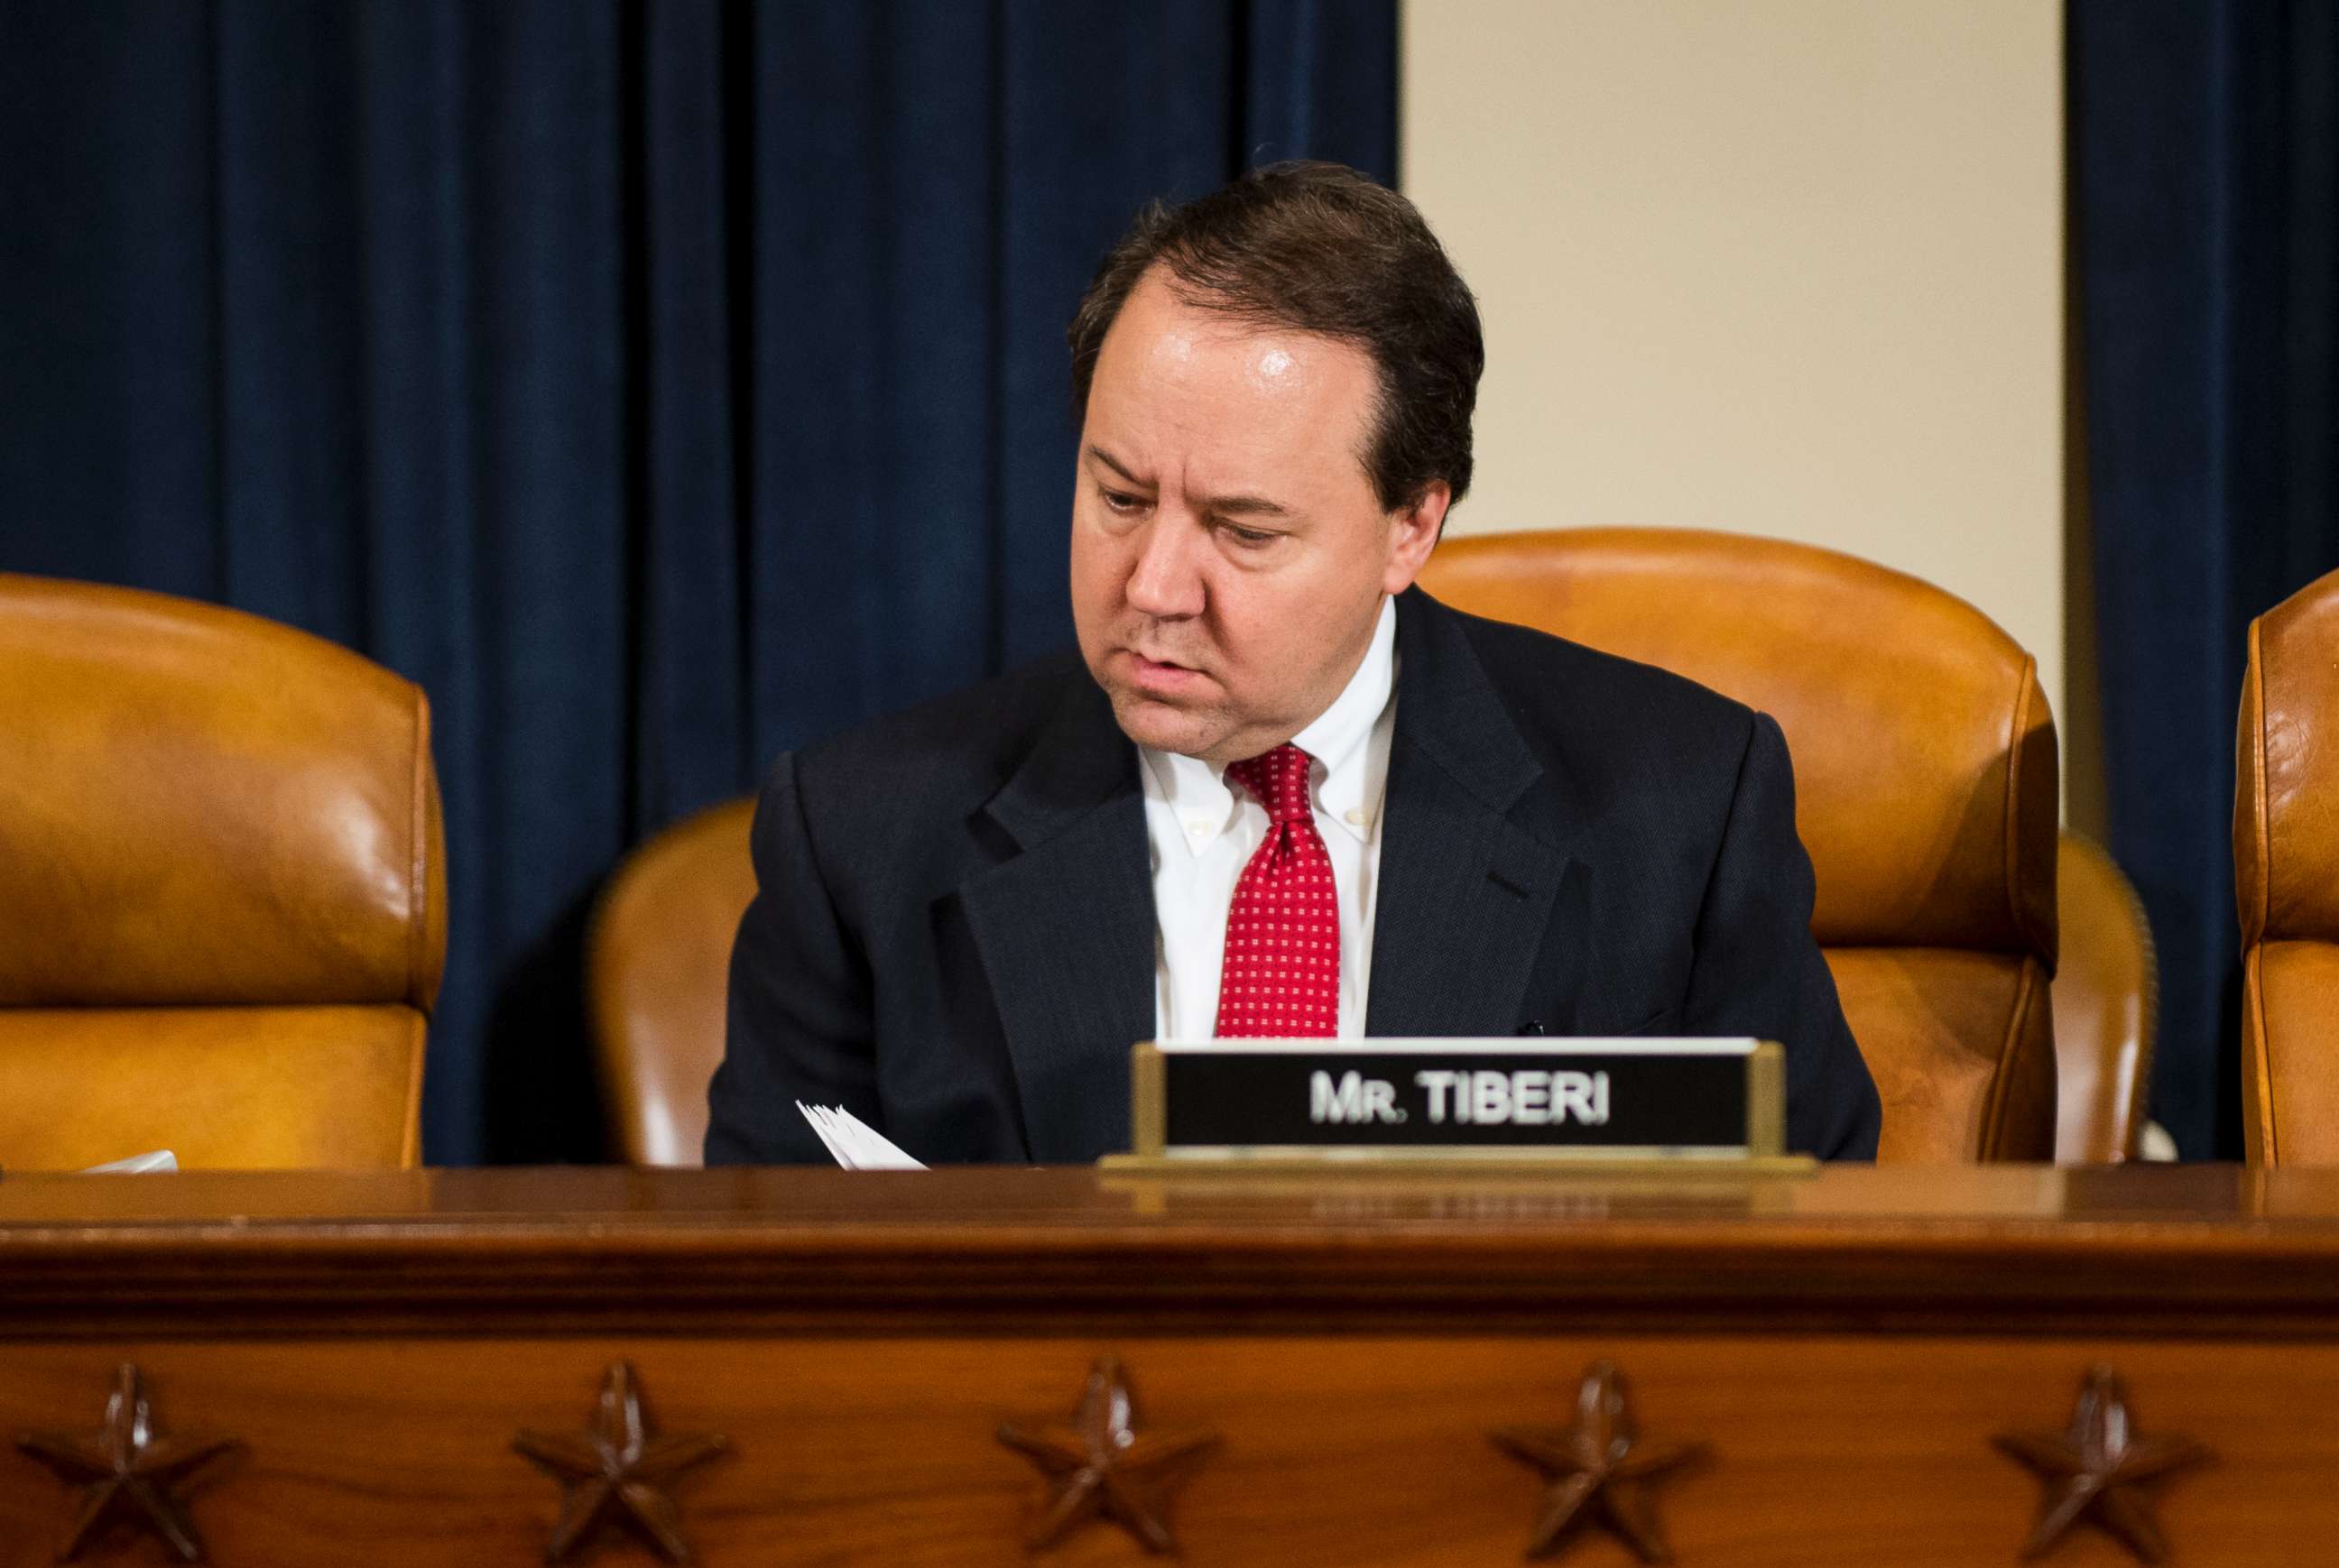 PHOTO: Rep. Pat Tiberi listens during the House Ways and Means Committee hearing on President Trumps budget proposals for fiscal year 2018 on May 24, 2017.